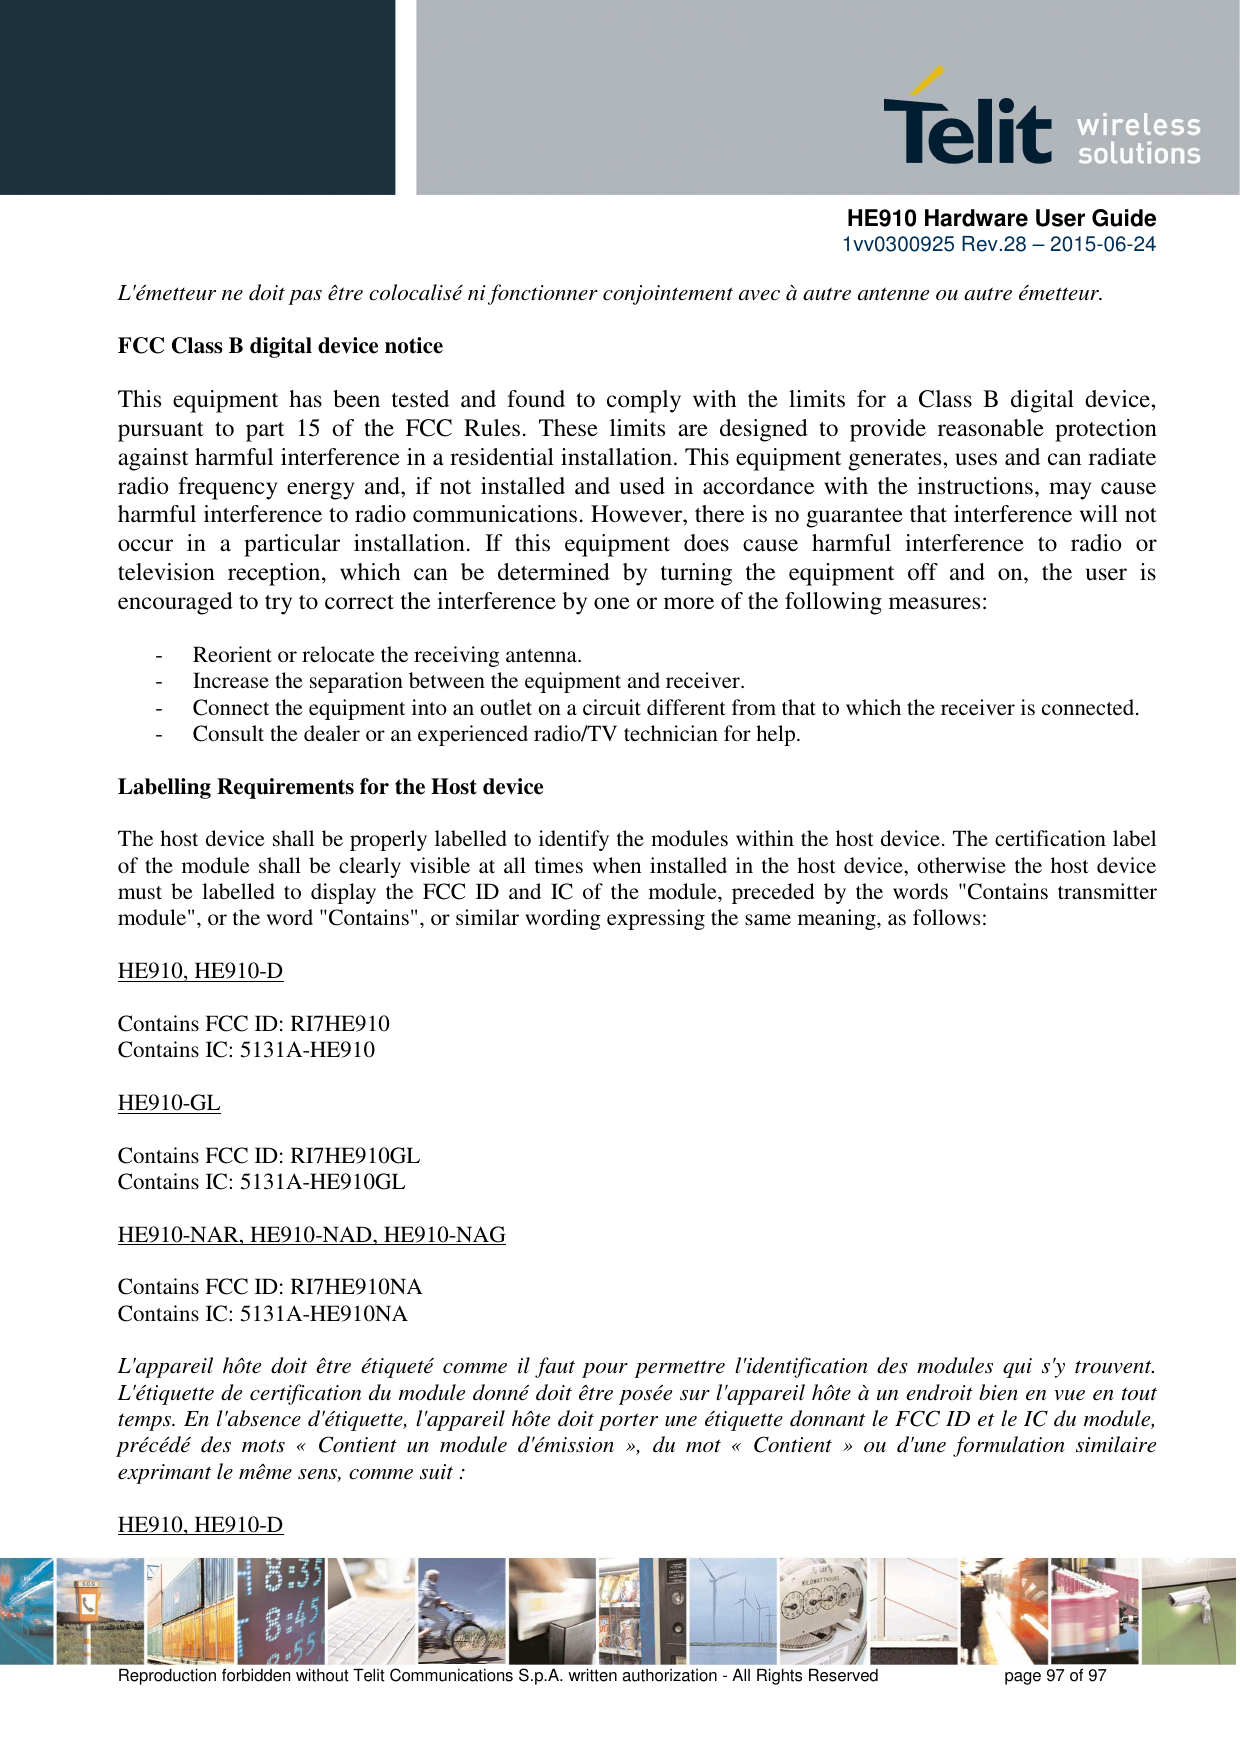      HE910 Hardware User Guide 1vv0300925 Rev.28 – 2015-06-24    Reproduction forbidden without Telit Communications S.p.A. written authorization - All Rights Reserved    page 97 of 97  L&apos;émetteur ne doit pas être colocalisé ni fonctionner conjointement avec à autre antenne ou autre émetteur.  FCC Class B digital device notice  This  equipment  has  been  tested  and  found  to  comply  with  the  limits  for  a  Class  B  digital  device, pursuant  to  part  15  of  the  FCC  Rules.  These  limits  are  designed  to  provide  reasonable  protection against harmful interference in a residential installation. This equipment generates, uses and can radiate radio frequency energy and, if not installed and used in accordance with the instructions, may cause harmful interference to radio communications. However, there is no guarantee that interference will not occur  in  a  particular  installation.  If  this  equipment  does  cause  harmful  interference  to  radio  or television  reception,  which  can  be  determined  by  turning  the  equipment  off  and  on,  the  user  is encouraged to try to correct the interference by one or more of the following measures:  - Reorient or relocate the receiving antenna. - Increase the separation between the equipment and receiver.  - Connect the equipment into an outlet on a circuit different from that to which the receiver is connected.  - Consult the dealer or an experienced radio/TV technician for help.  Labelling Requirements for the Host device  The host device shall be properly labelled to identify the modules within the host device. The certification label of the module shall be clearly visible at all times when installed in the host device, otherwise the host device must be labelled to display the  FCC  ID and  IC of the  module, preceded by the words &quot;Contains transmitter module&quot;, or the word &quot;Contains&quot;, or similar wording expressing the same meaning, as follows:  HE910, HE910-D  Contains FCC ID: RI7HE910 Contains IC: 5131A-HE910  HE910-GL  Contains FCC ID: RI7HE910GL Contains IC: 5131A-HE910GL  HE910-NAR, HE910-NAD, HE910-NAG  Contains FCC ID: RI7HE910NA  Contains IC: 5131A-HE910NA  L&apos;appareil hôte  doit  être  étiqueté  comme  il  faut  pour  permettre  l&apos;identification des  modules qui  s&apos;y  trouvent. L&apos;étiquette de certification du module donné doit être posée sur l&apos;appareil hôte à un endroit bien en vue en tout temps. En l&apos;absence d&apos;étiquette, l&apos;appareil hôte doit porter une étiquette donnant le FCC ID et le IC du module, précédé  des  mots  «  Contient  un  module  d&apos;émission  »,  du  mot  «  Contient  »  ou  d&apos;une  formulation  similaire exprimant le même sens, comme suit :  HE910, HE910-D 